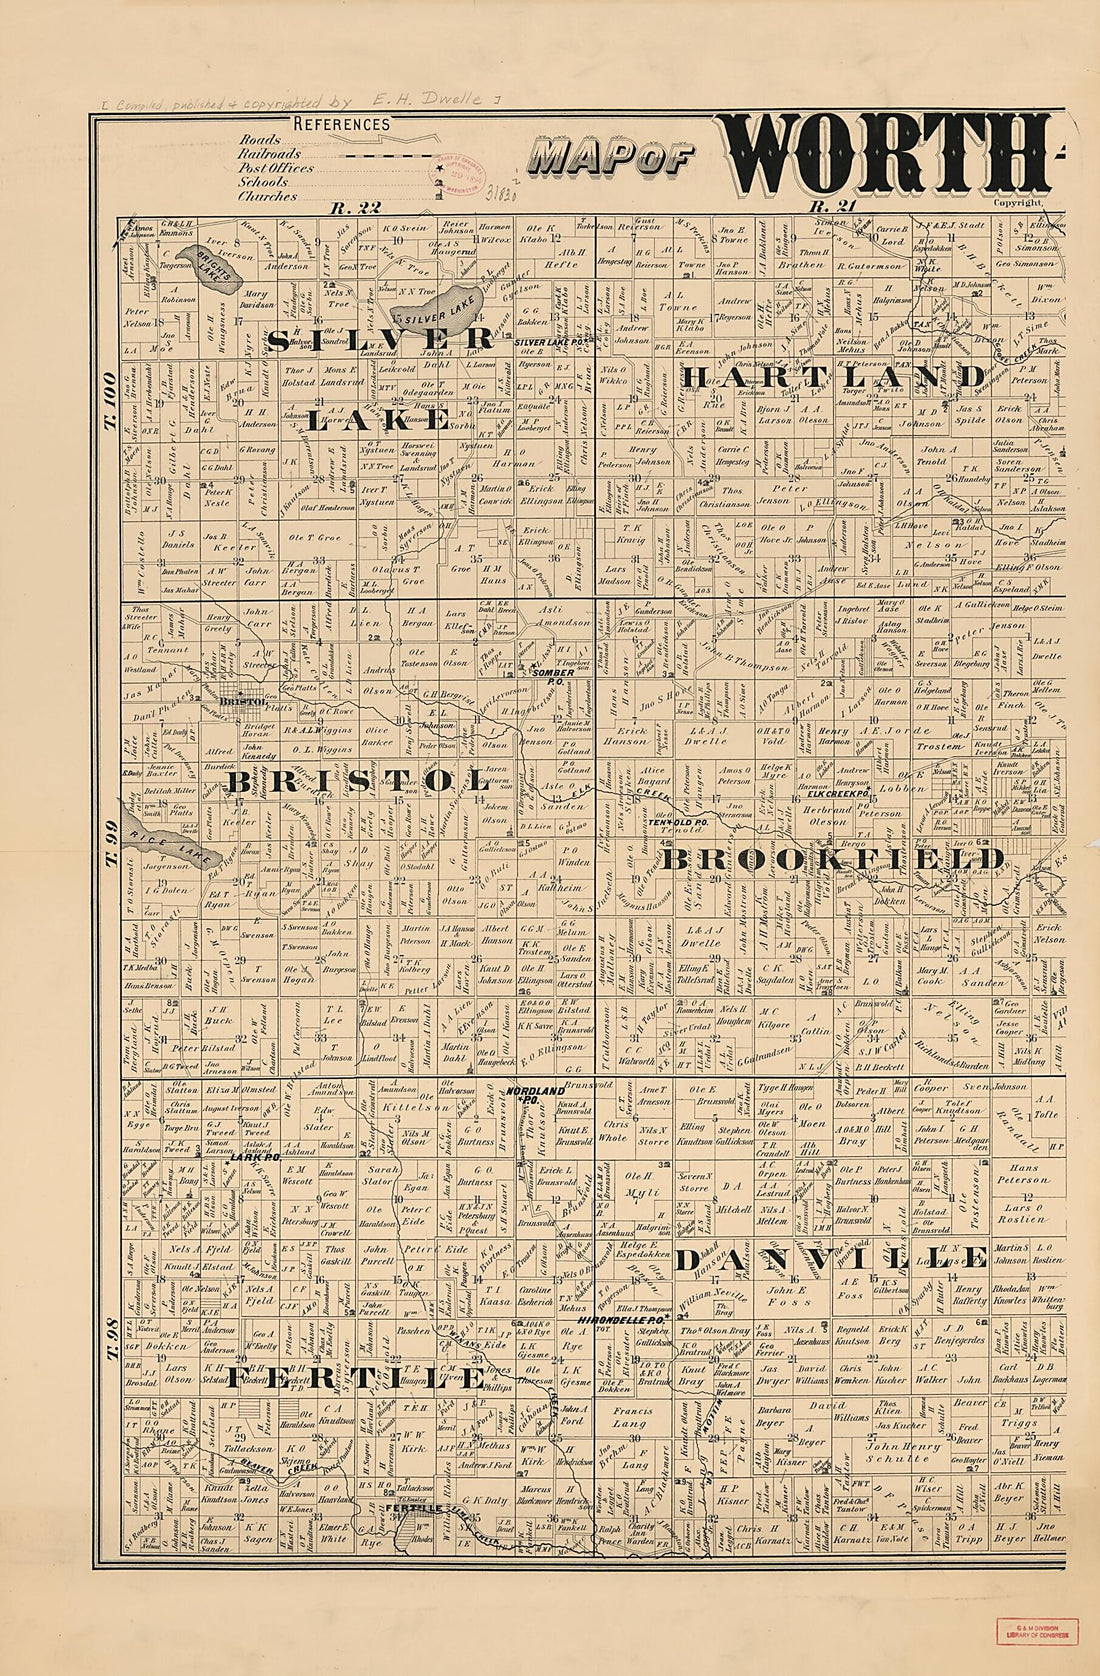 This old map of Map of Worth County, Iowa from 1894 was created by E. H. Dwelle in 1894